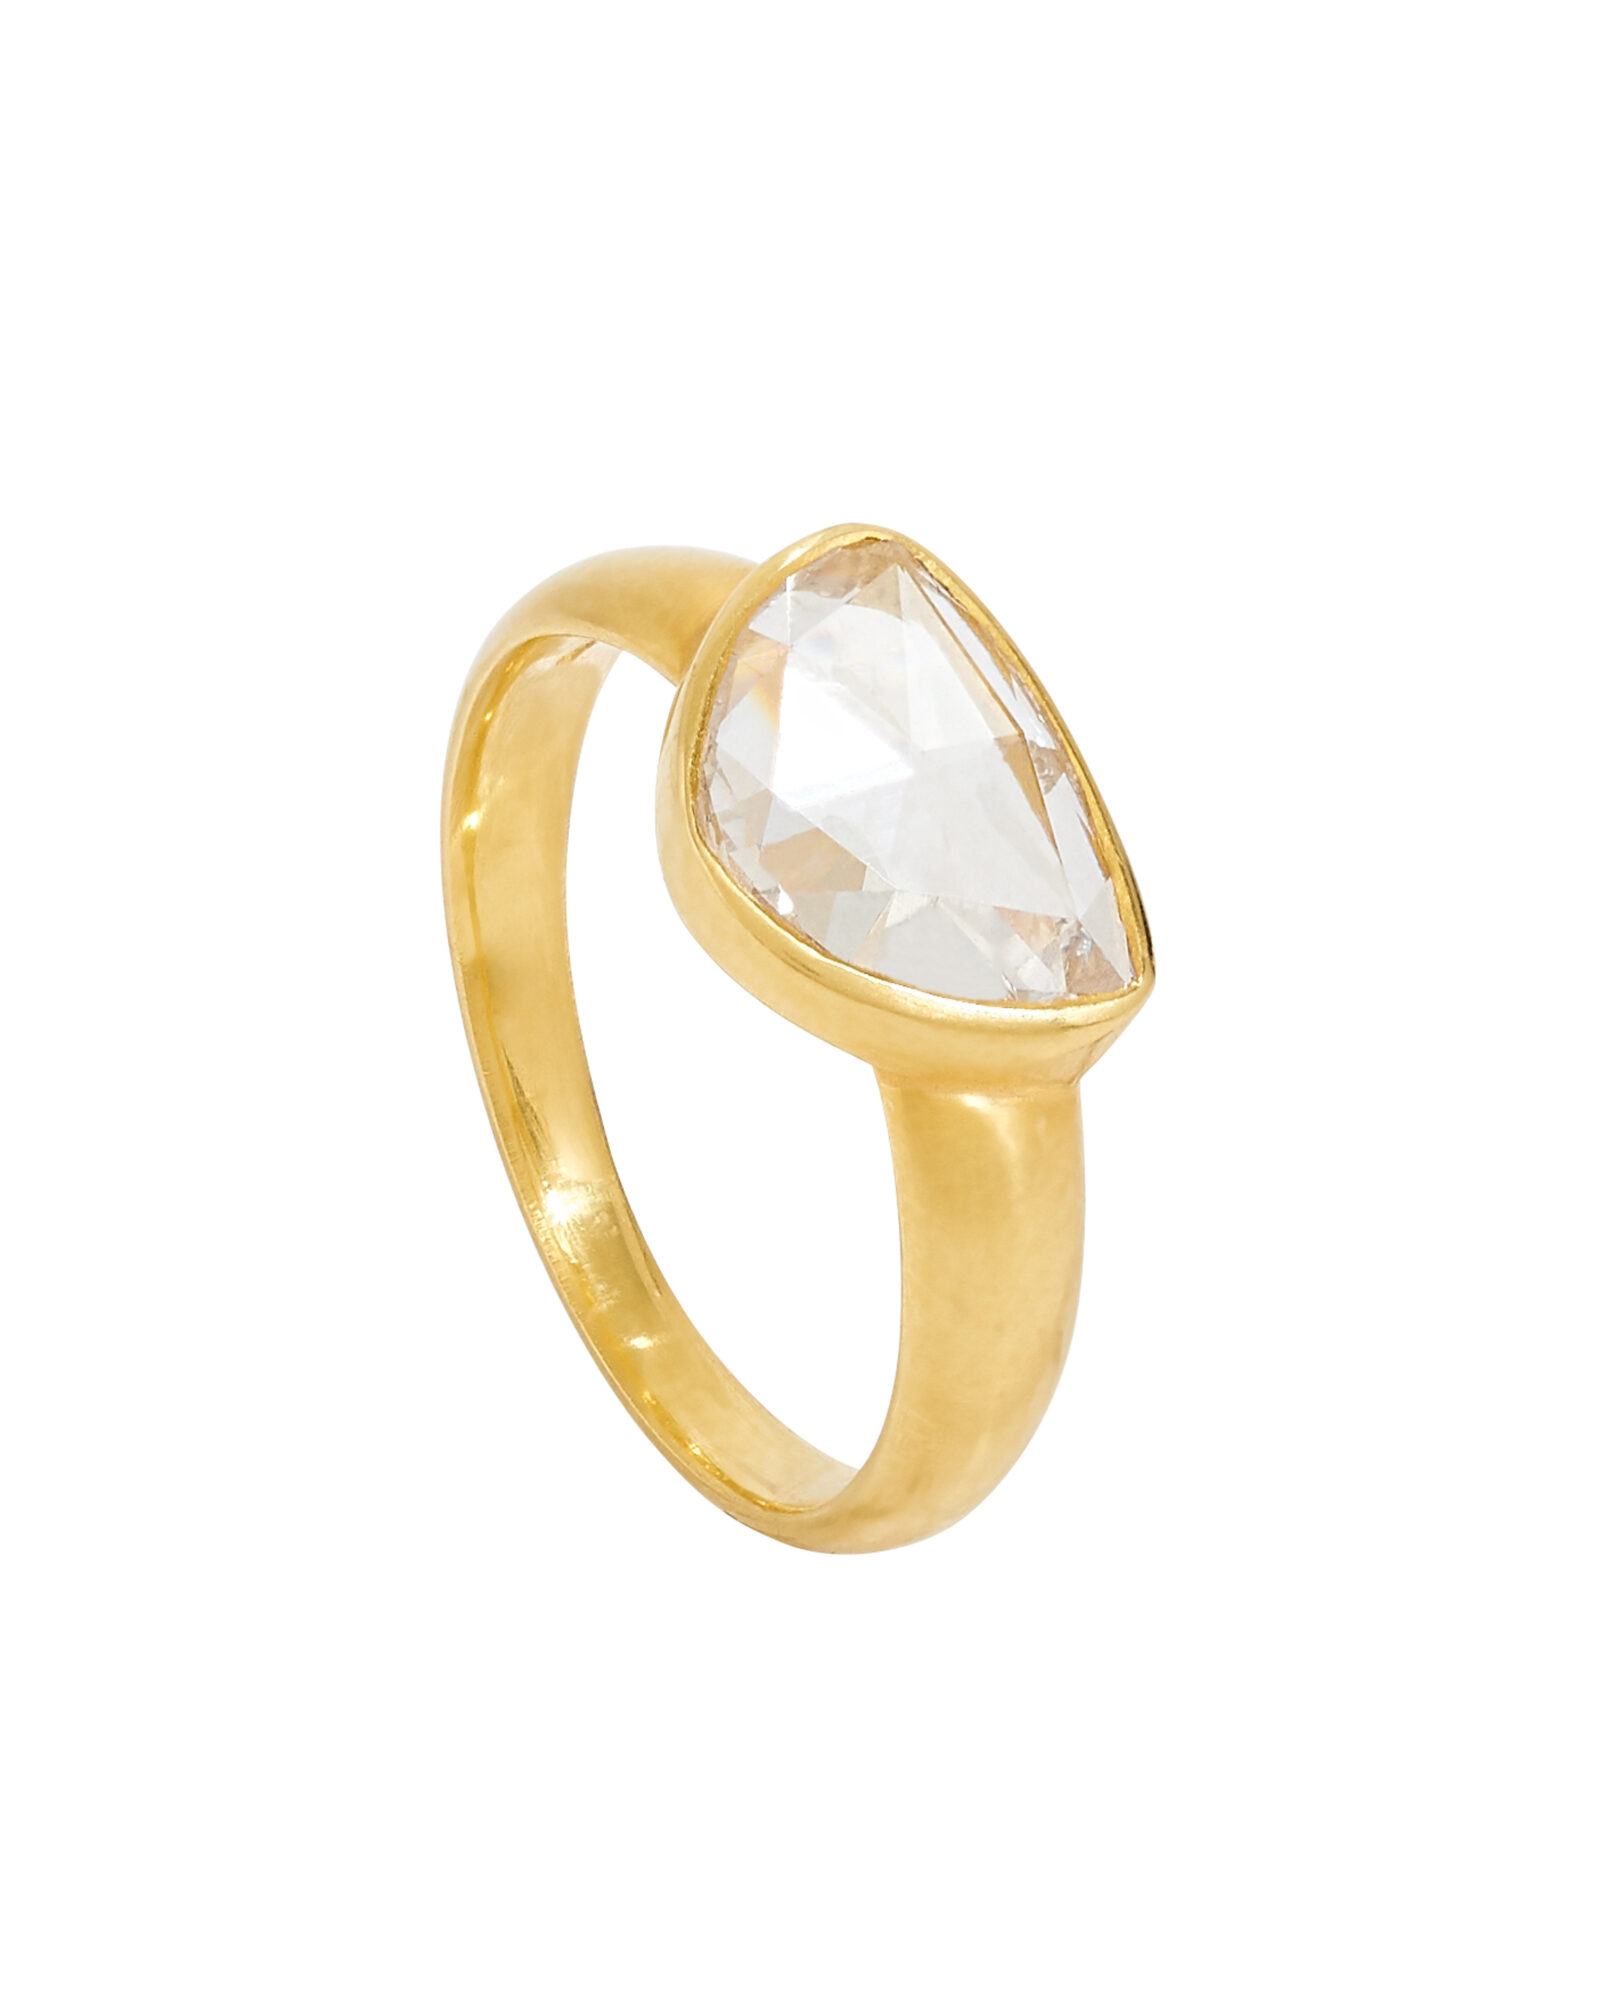 sustainable jewelry designer gold and diamond rings